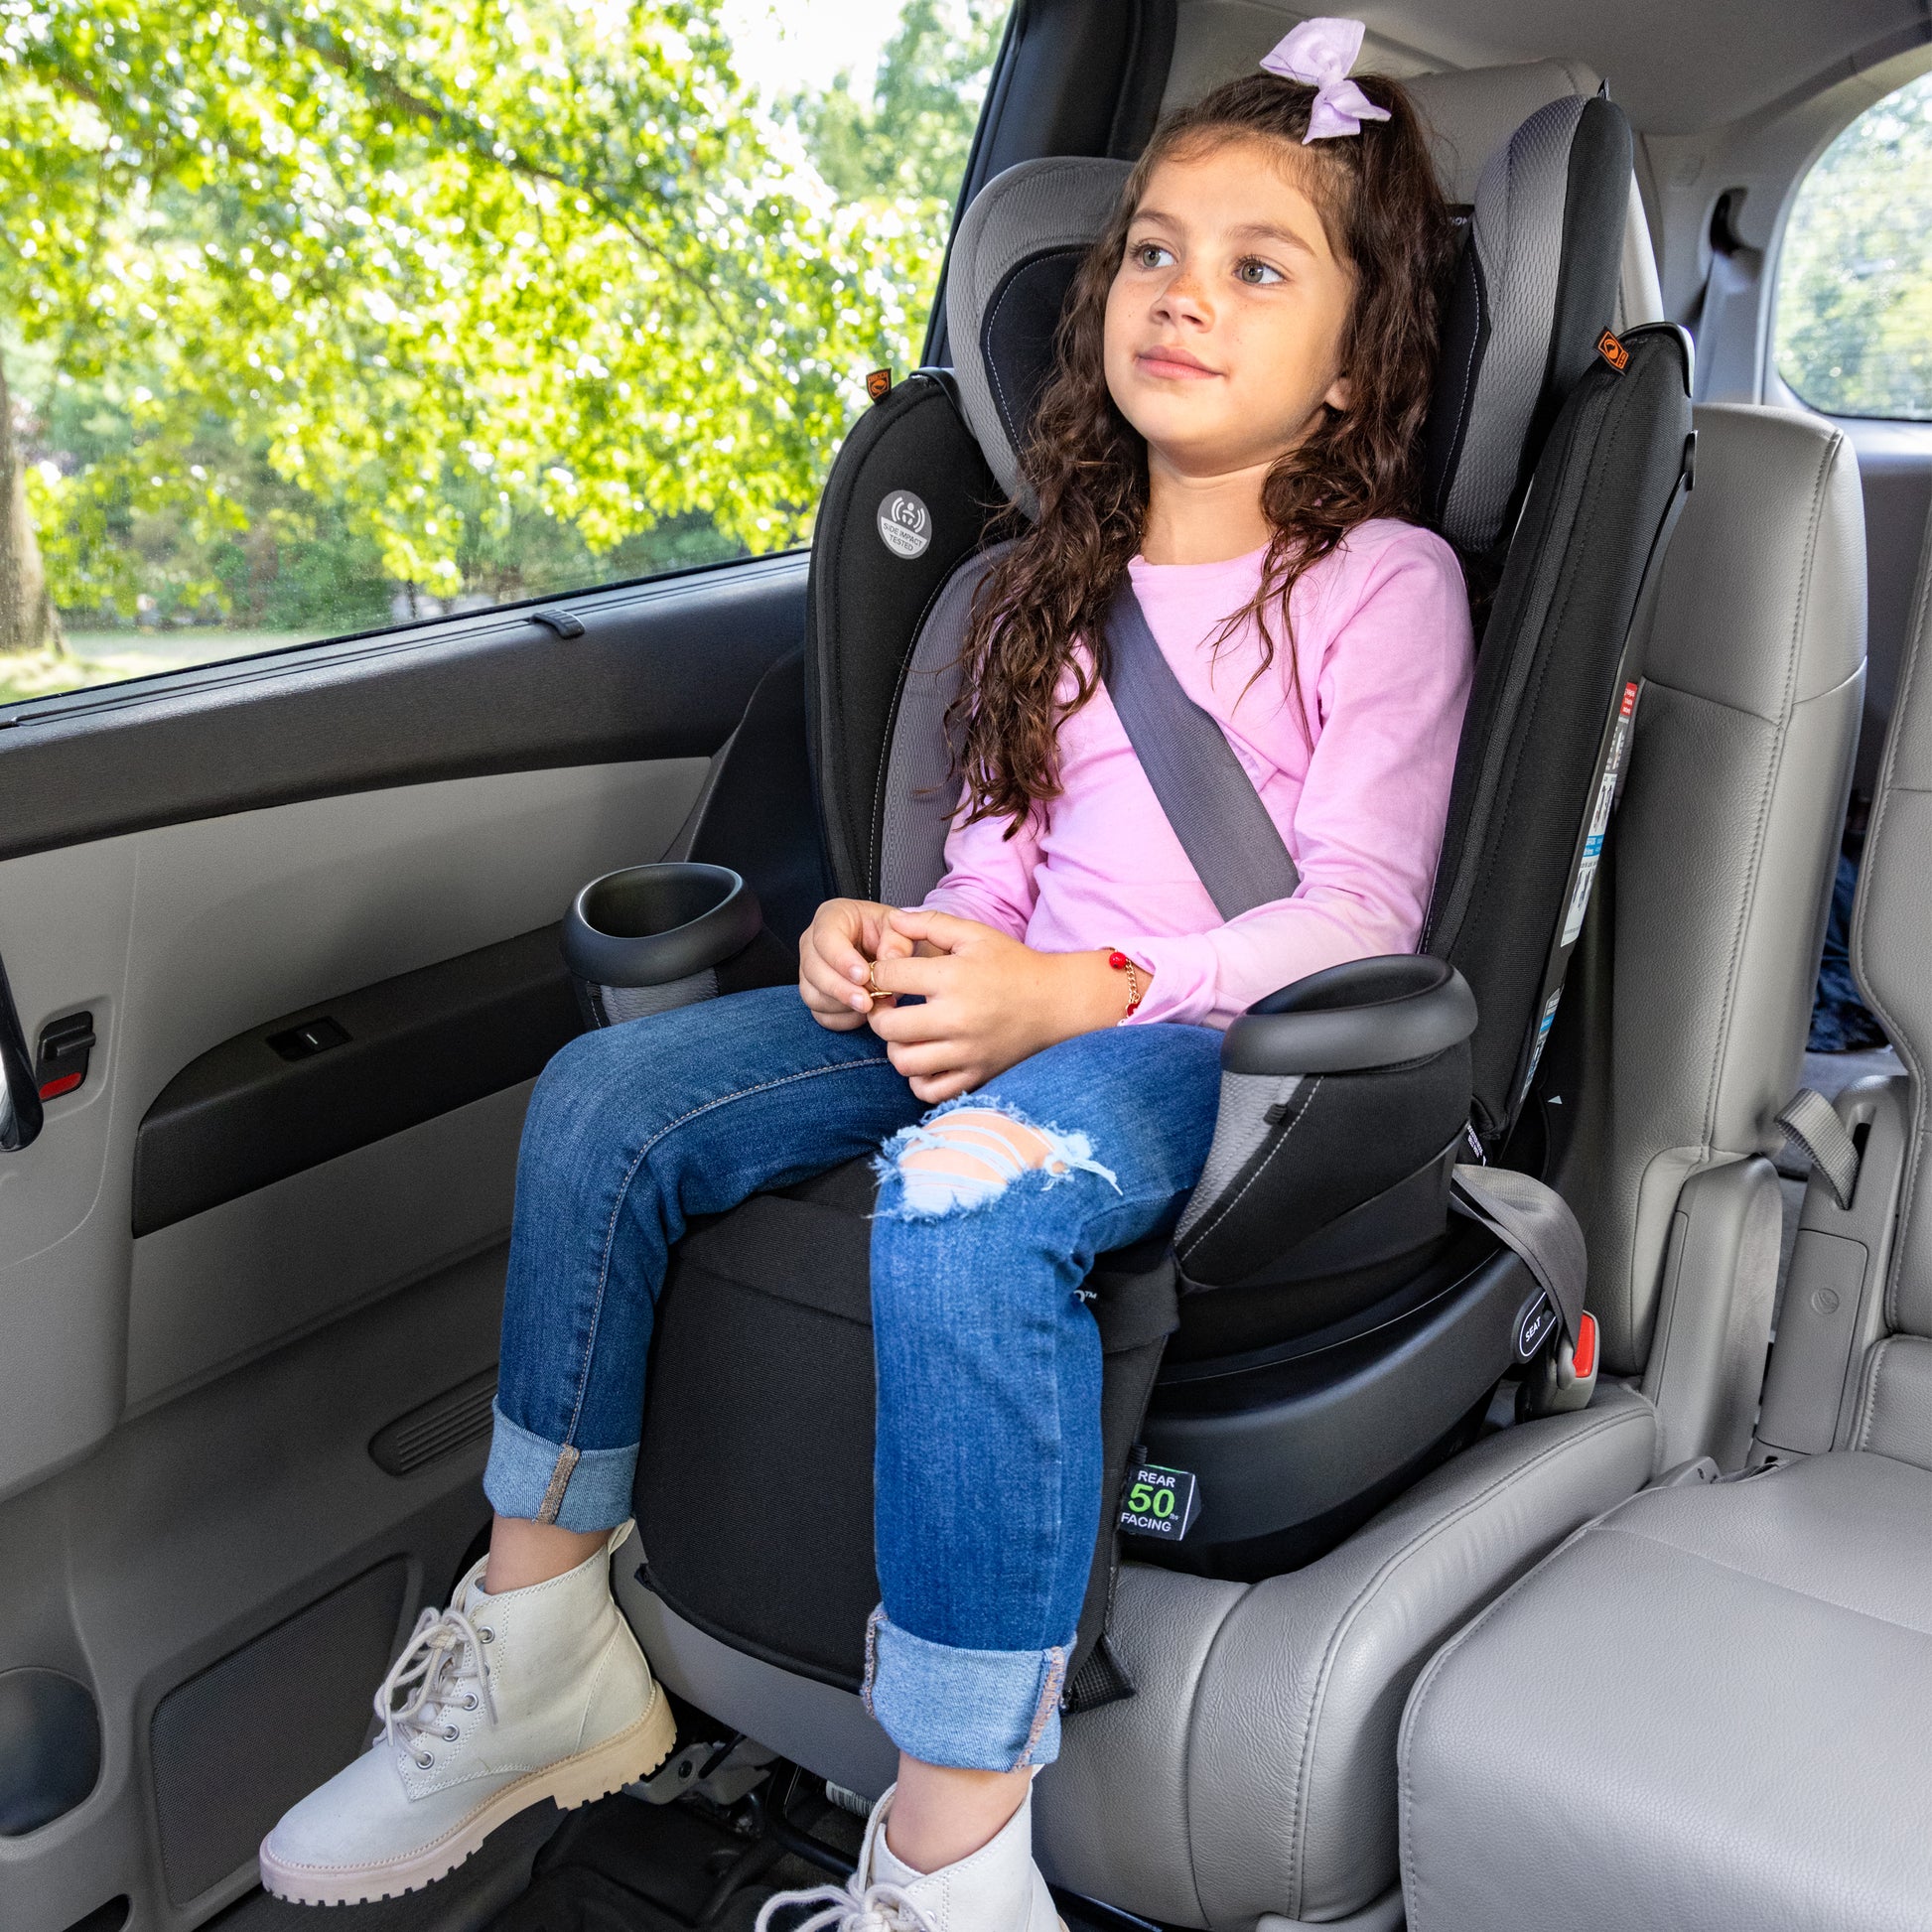 4-year-old Trades Booster Seat for the Driver's Seat